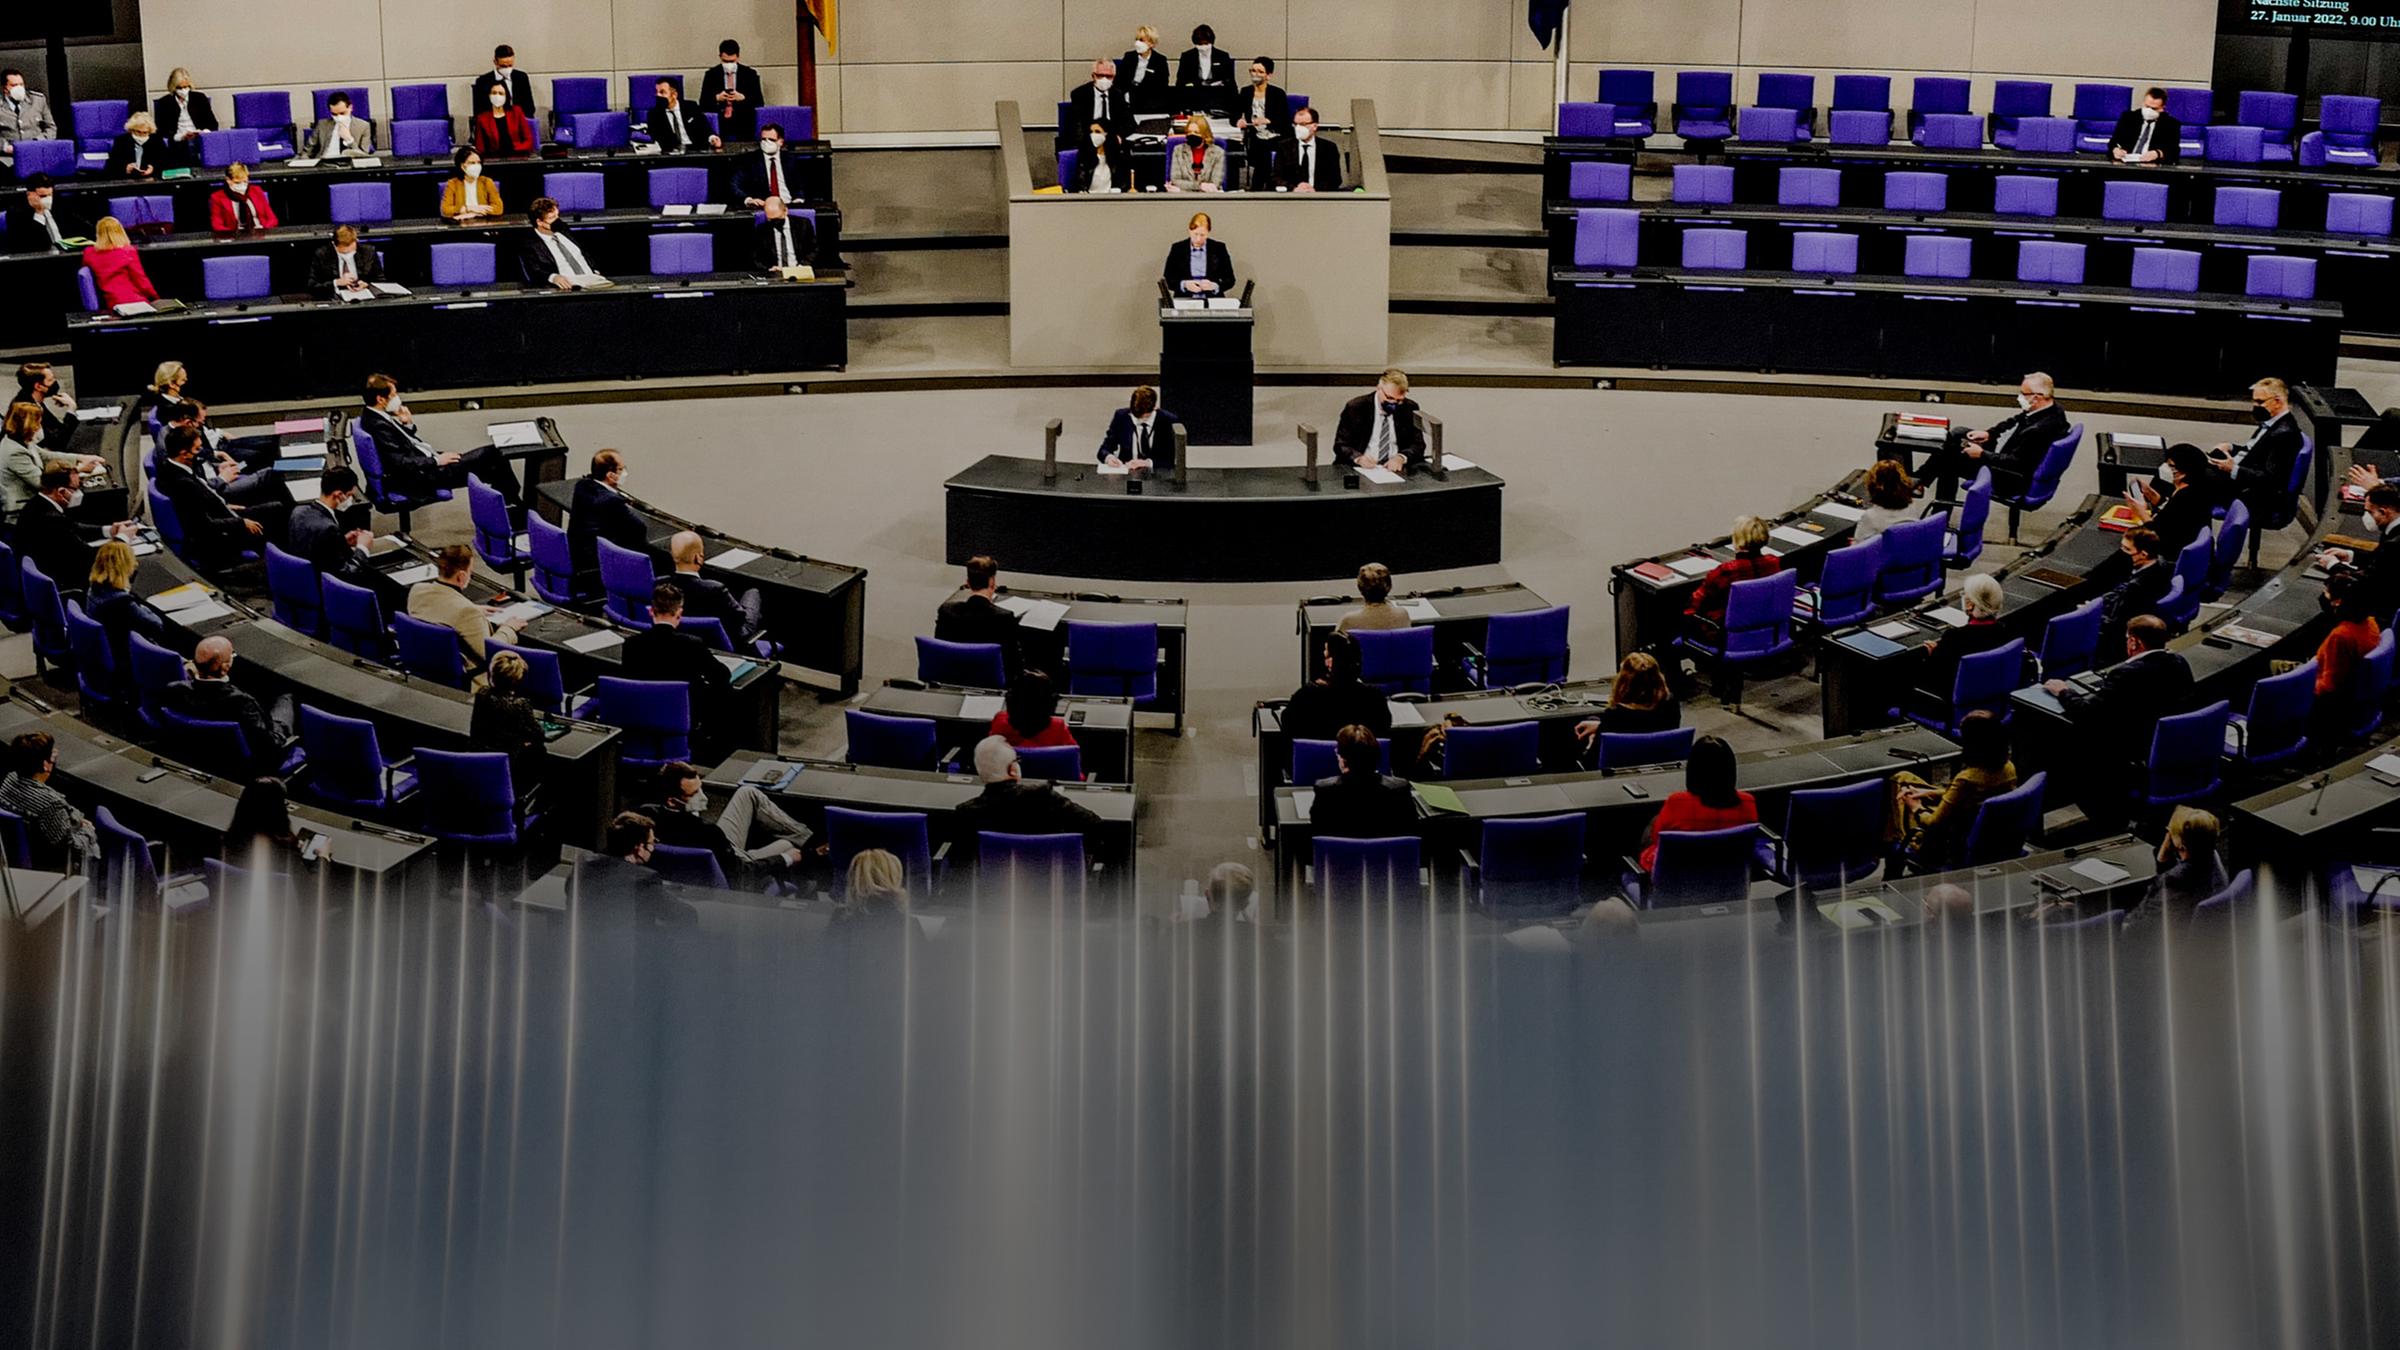 Members of the Bundestag take part in the orientation debate on compulsory SARS-CoV-2 vaccination in the Bundestag.